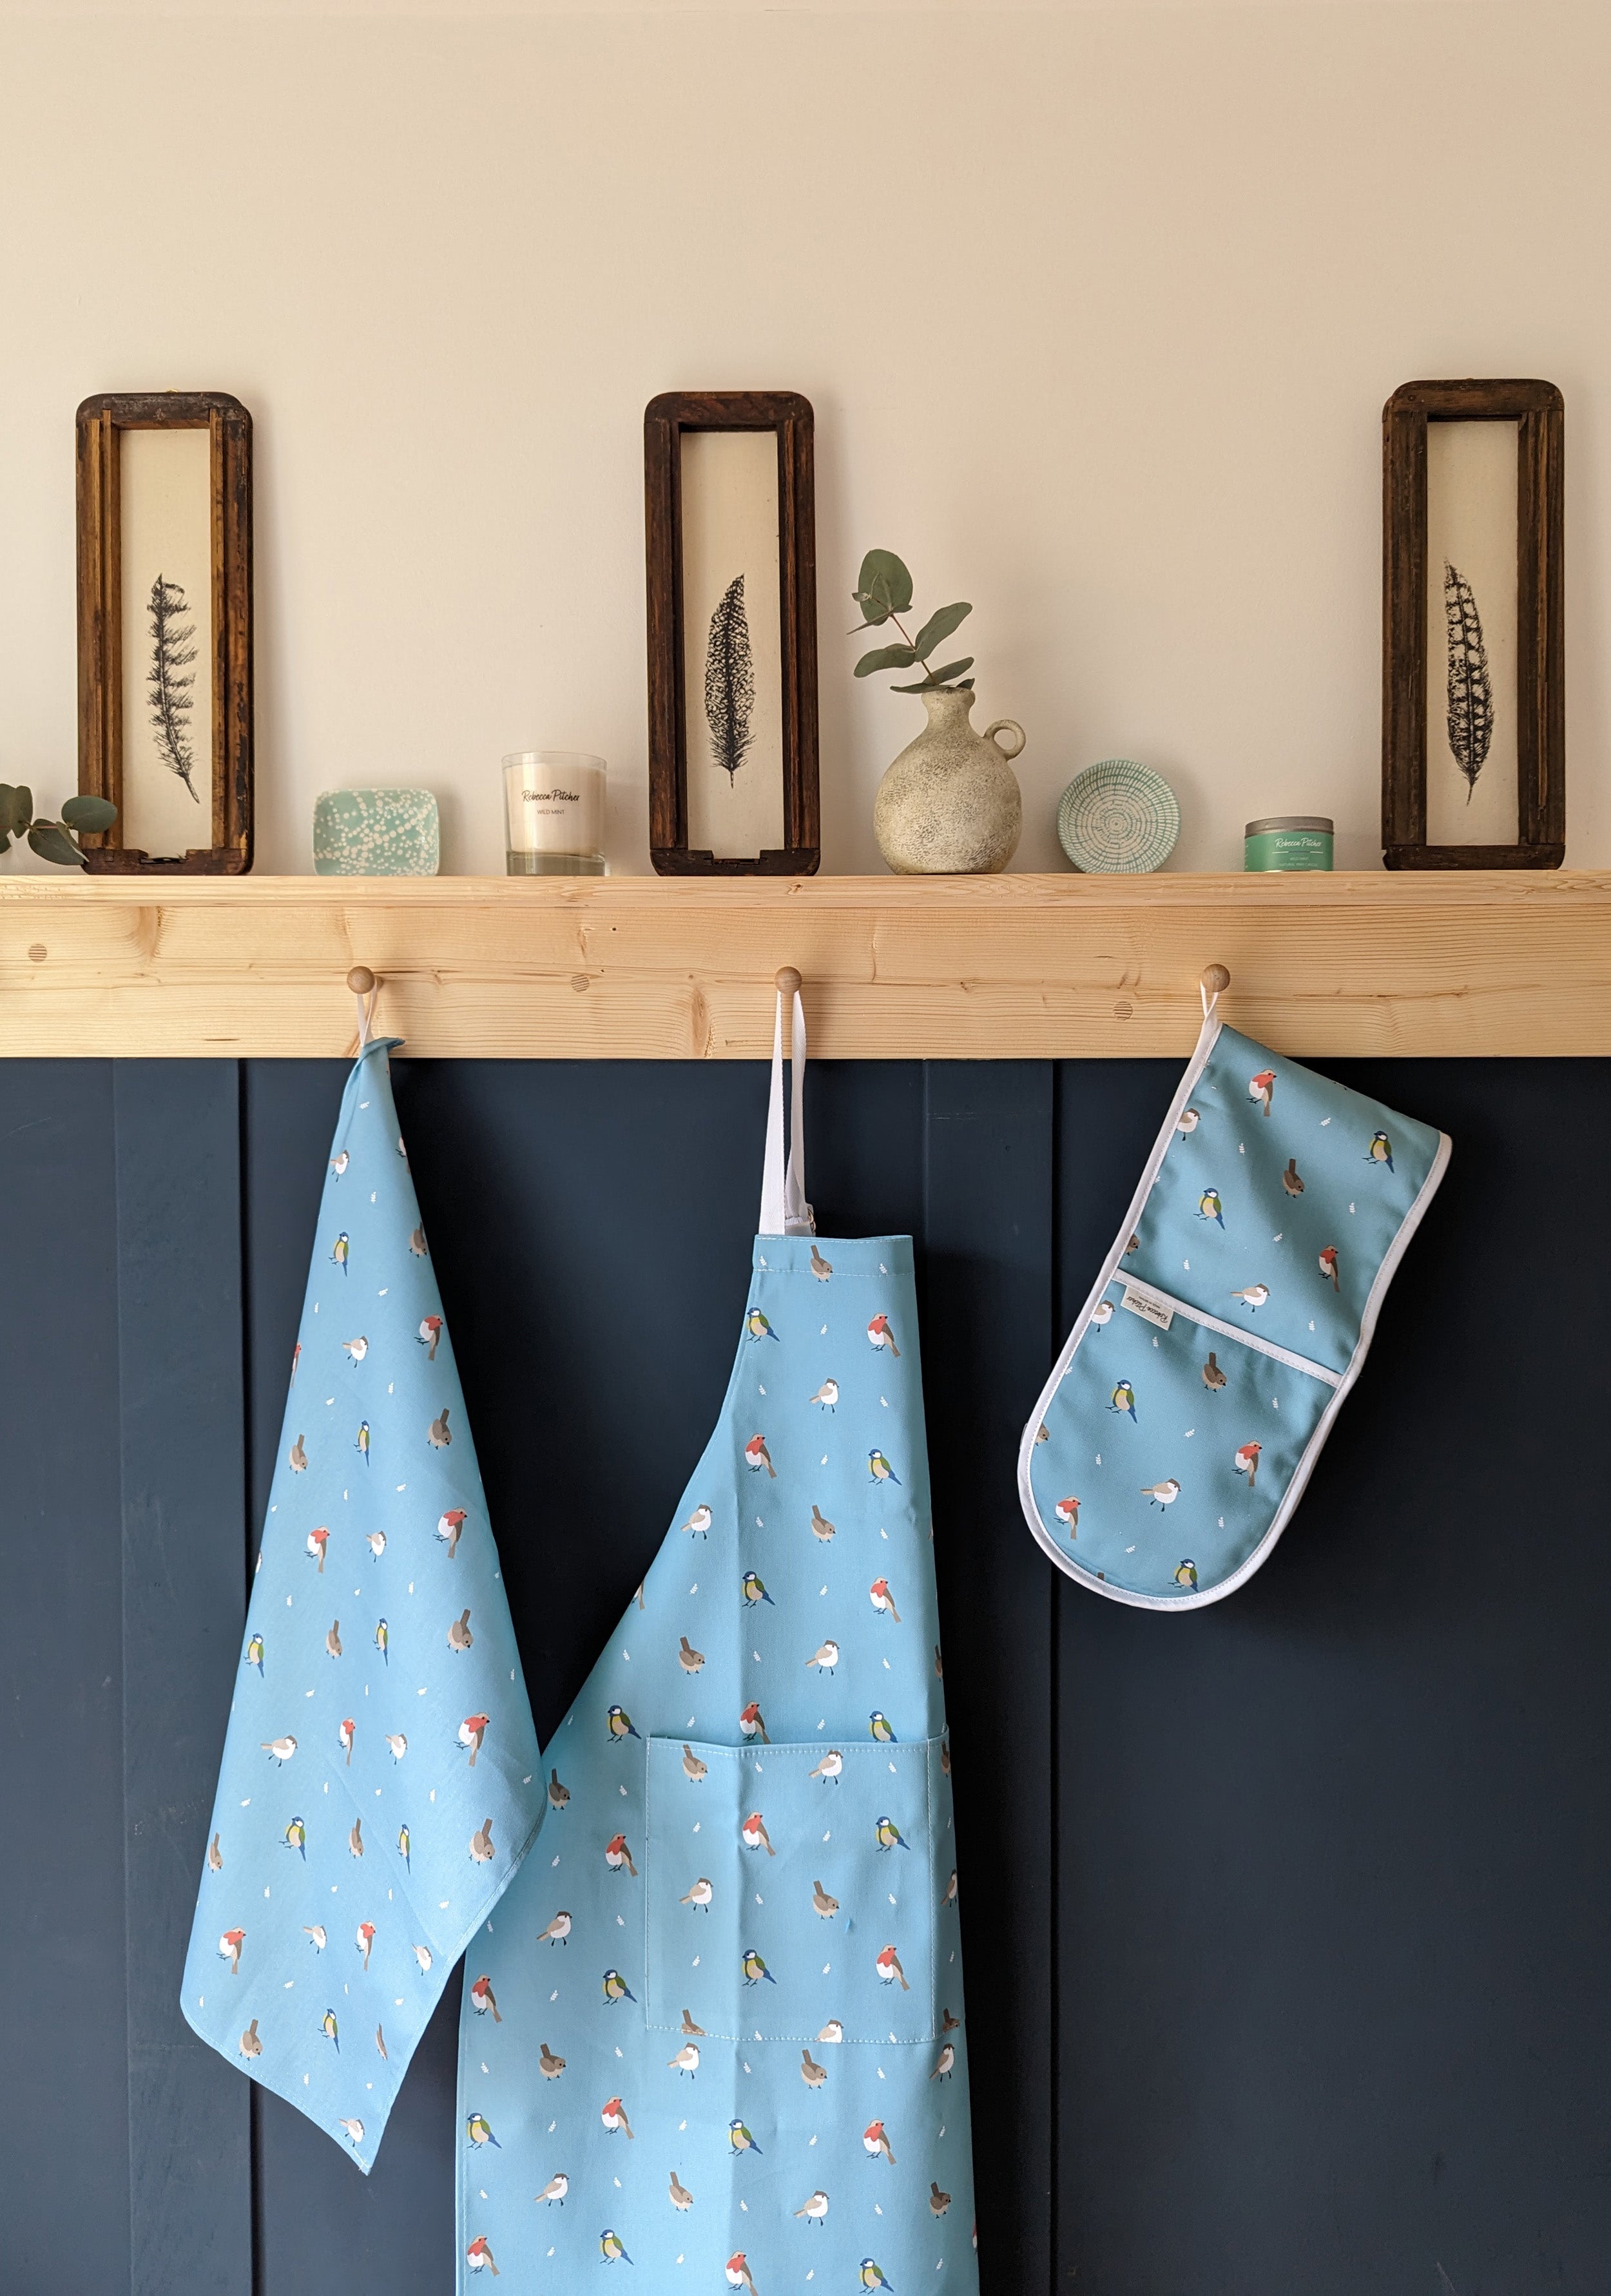 Birds Cotton Apron, oven glove and tea towel by Rebecca Pitcher